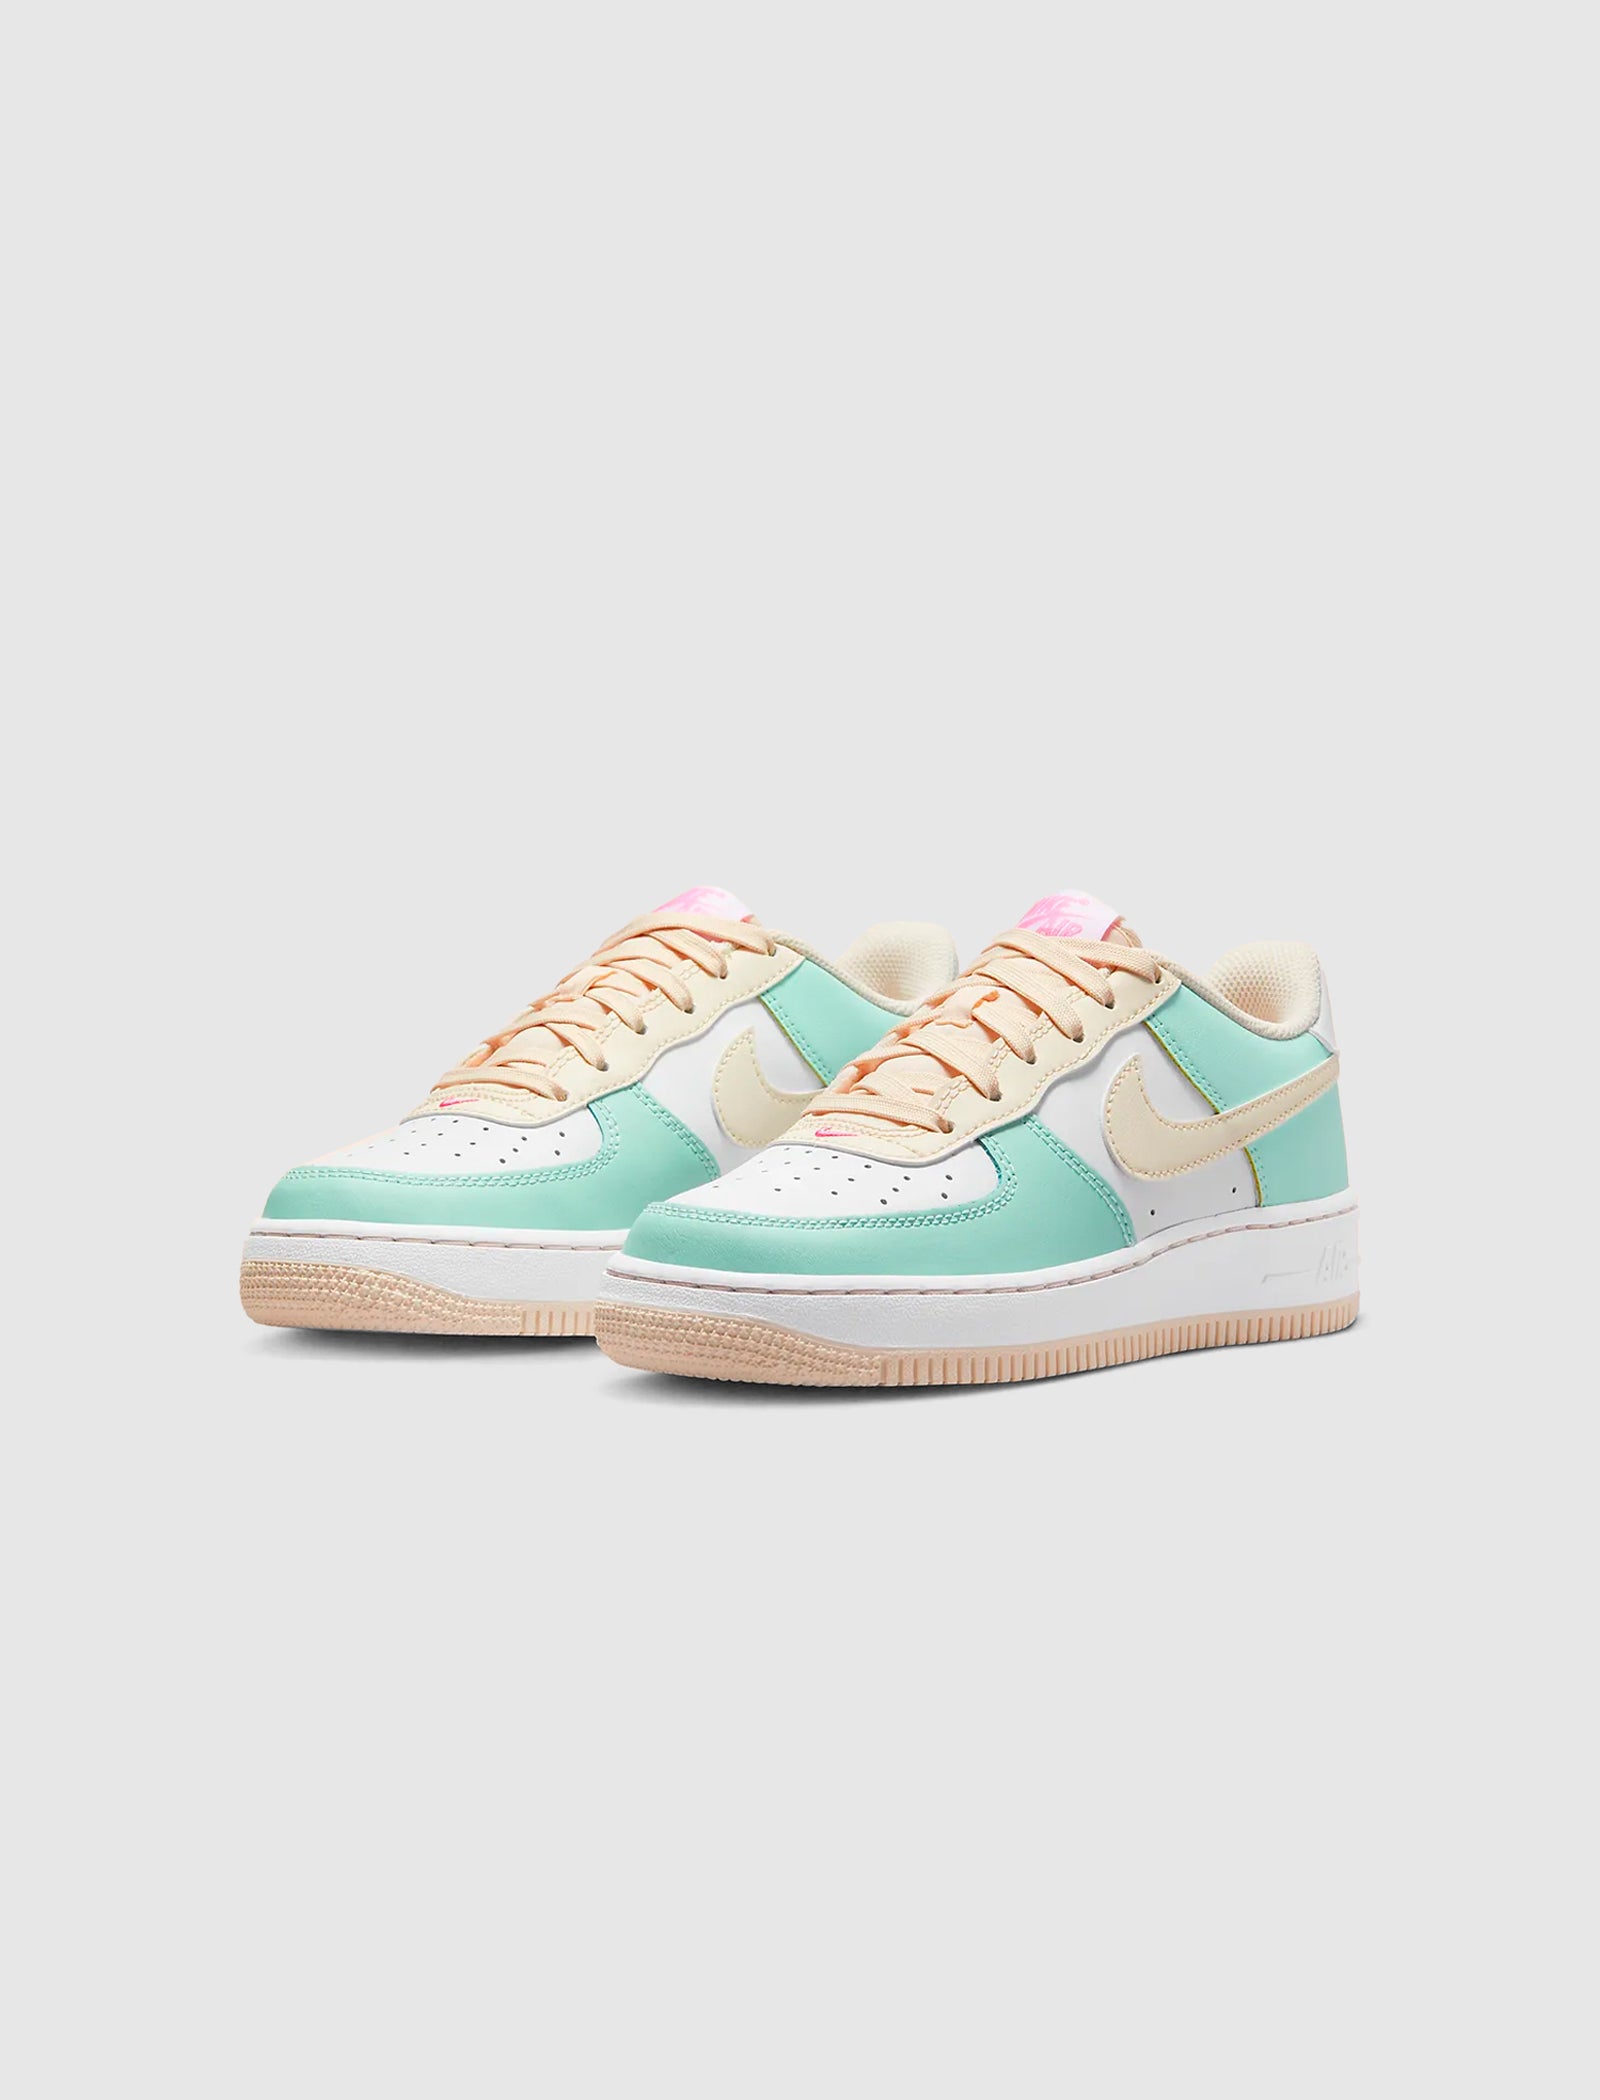 AIR FORCE 1 "JADE ICE/GUAVA ICE" GS